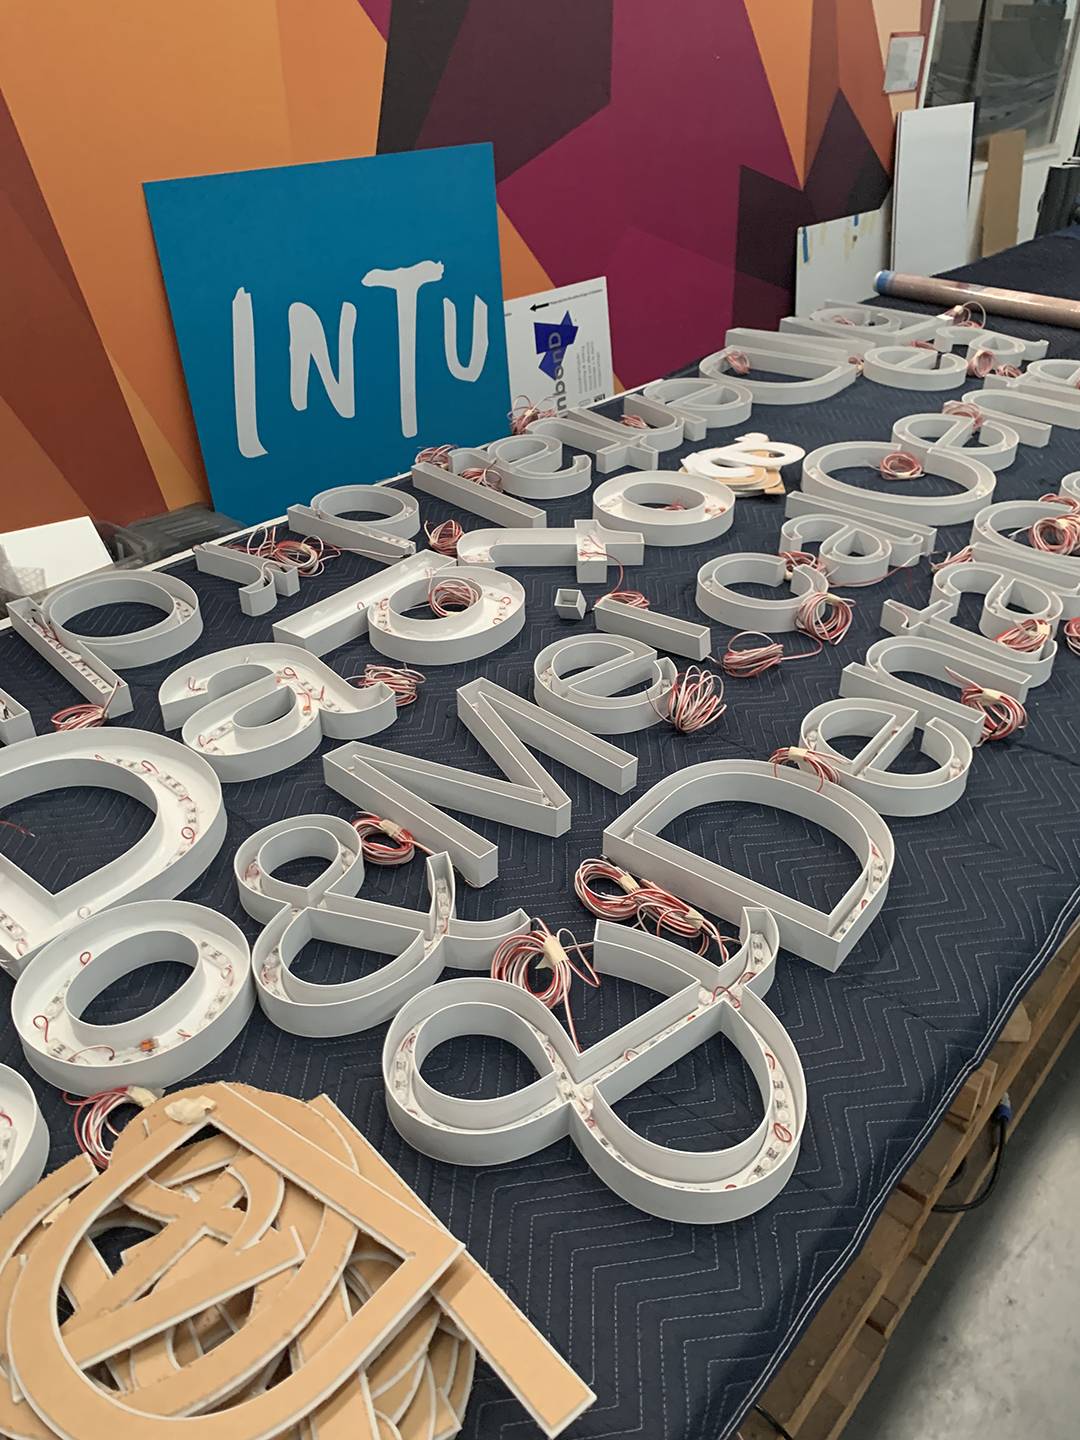 Dapto Medical 3D Printed Letters